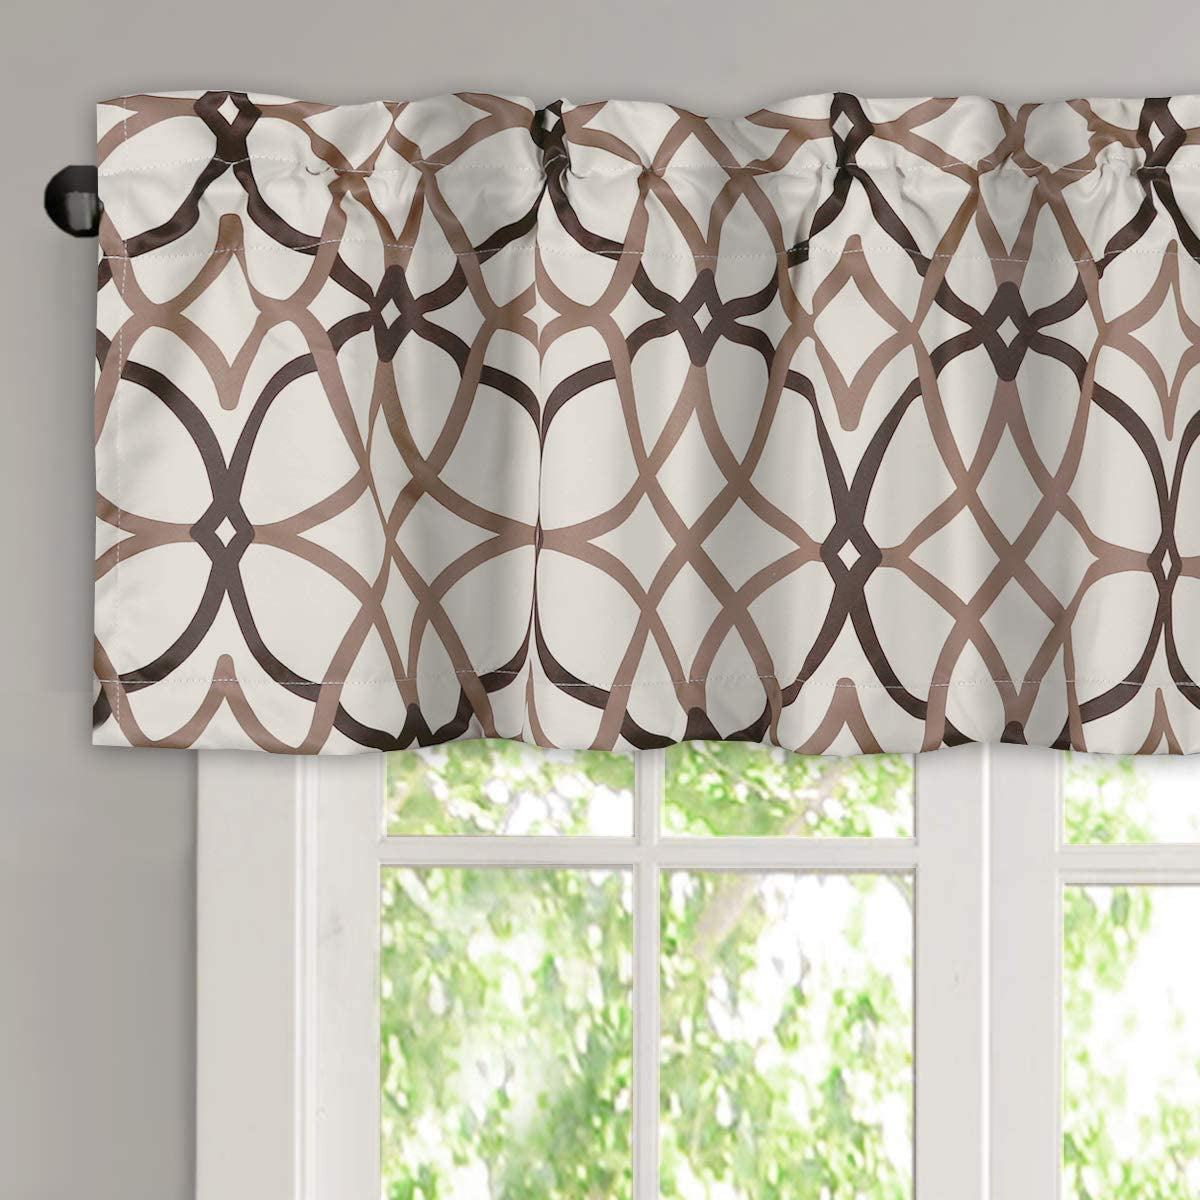 Blackout Curtain Valances for Kitchen/Bathroom - Thermal Insulated Window Valances for Living Room/Bedroom Rod Pocket Short Curtain 1 Panel, 52X18 Inch, Geo in Grey and Navy